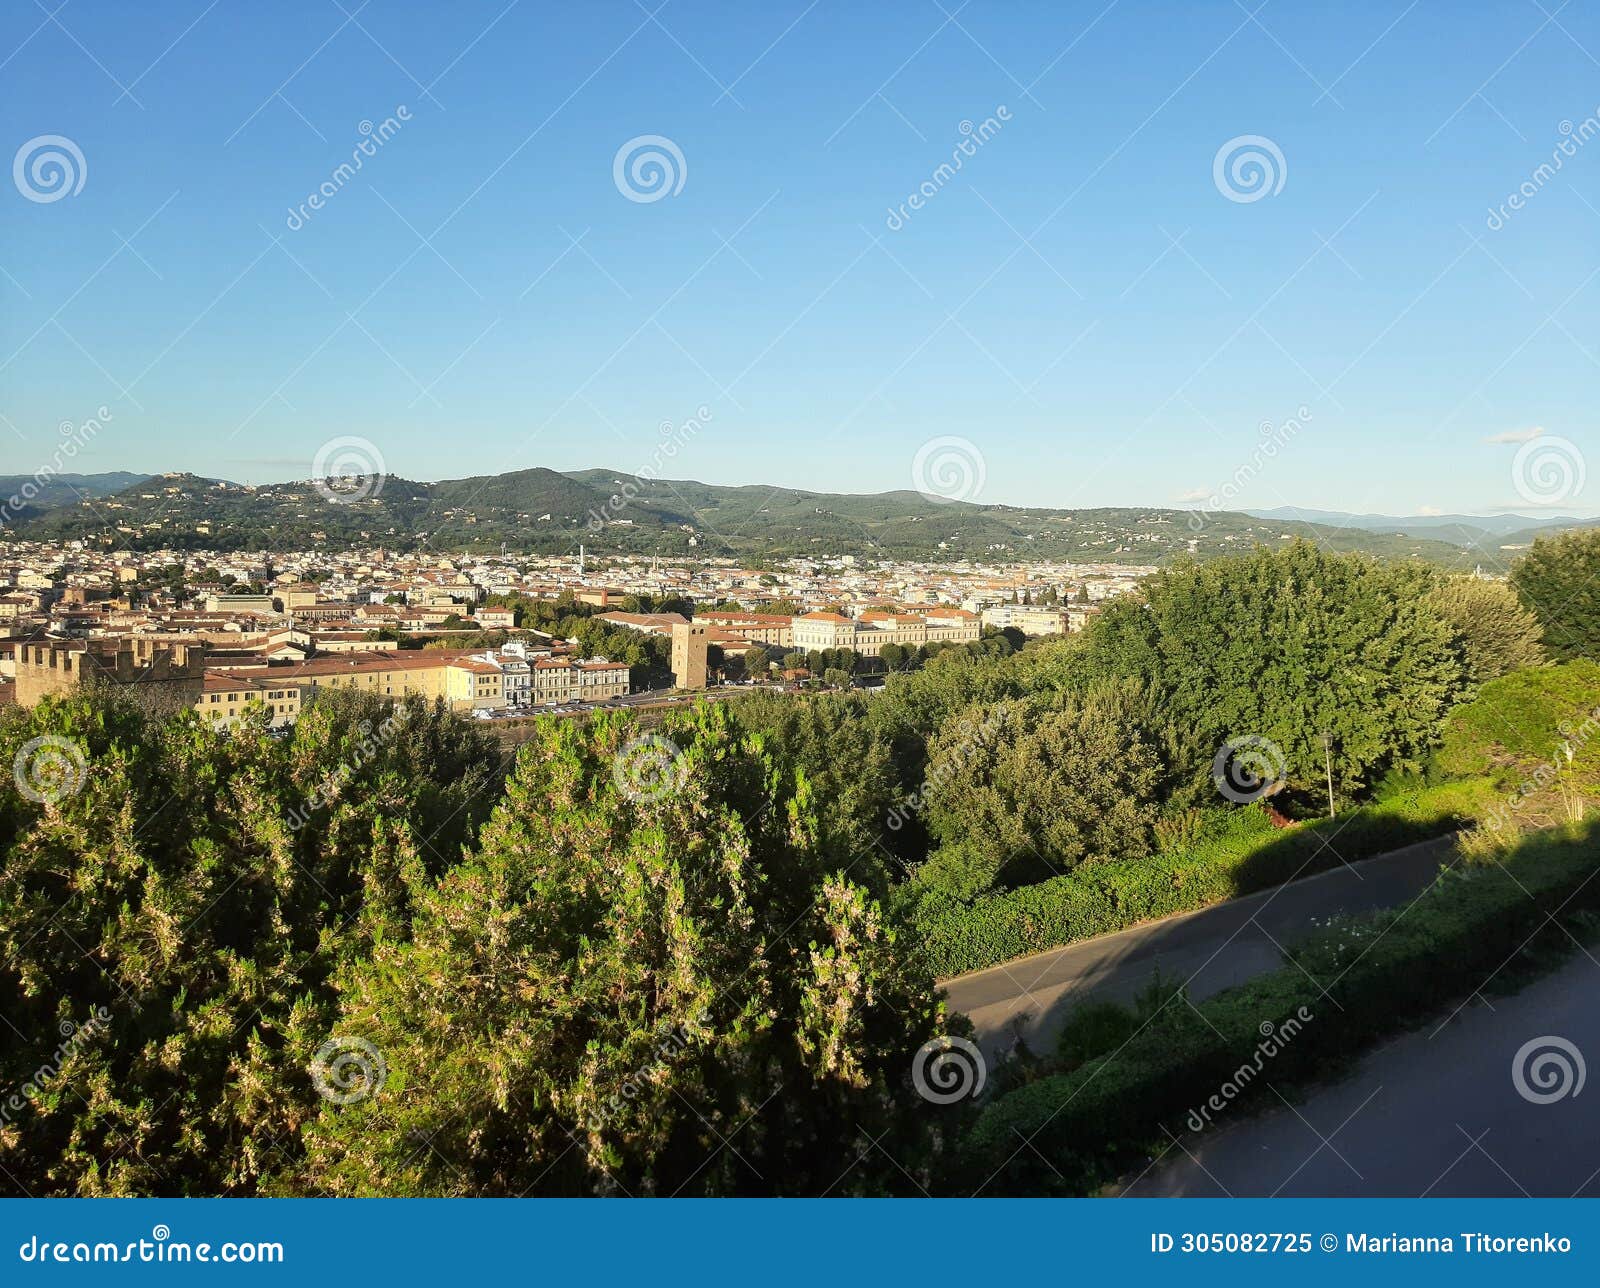 view of the roman buildings, architecture . florencia